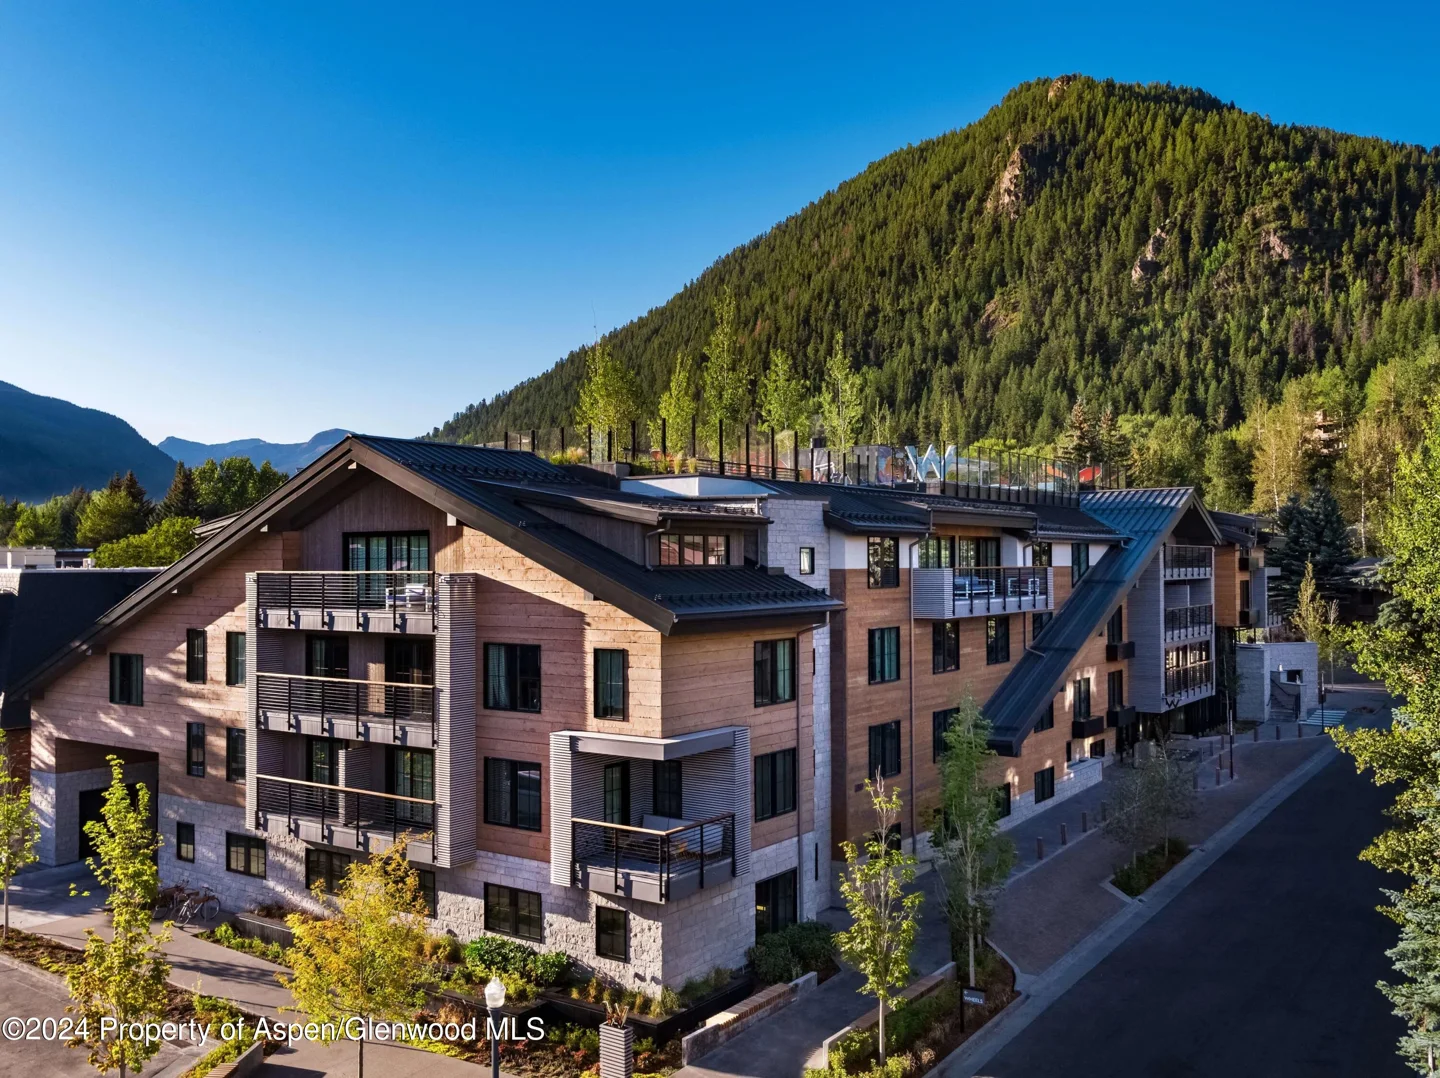 3-Bedroom at the W Sky Residences During Peak Fall in Aspen